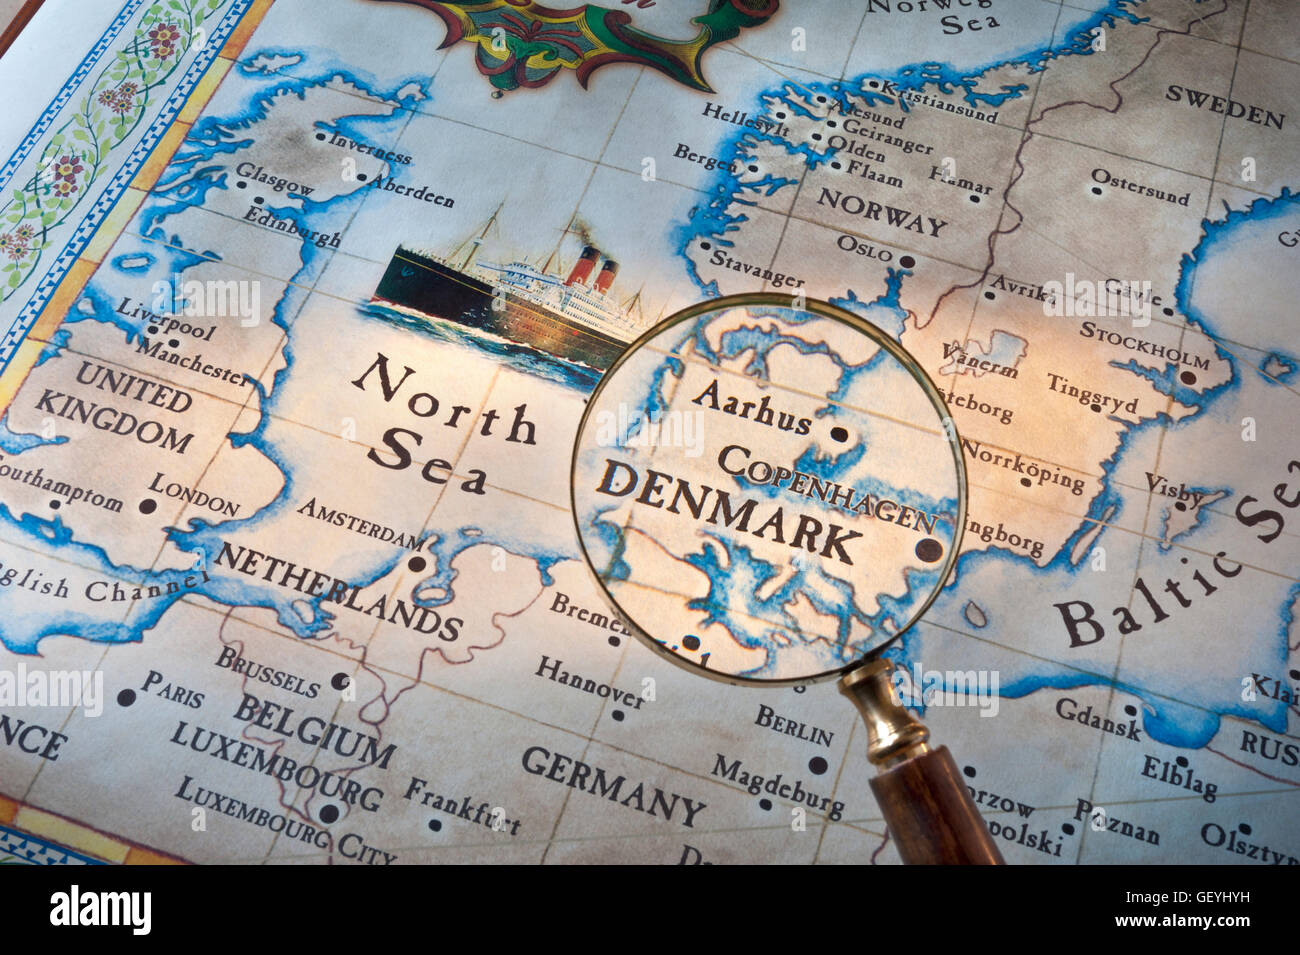 DENMARK COPENHAGEN AARHUS Old style map with magnifying glass over Denmark-Copenhagen-Aarhus. Cruise ship featured in North Sea with UK & Europe Stock Photo